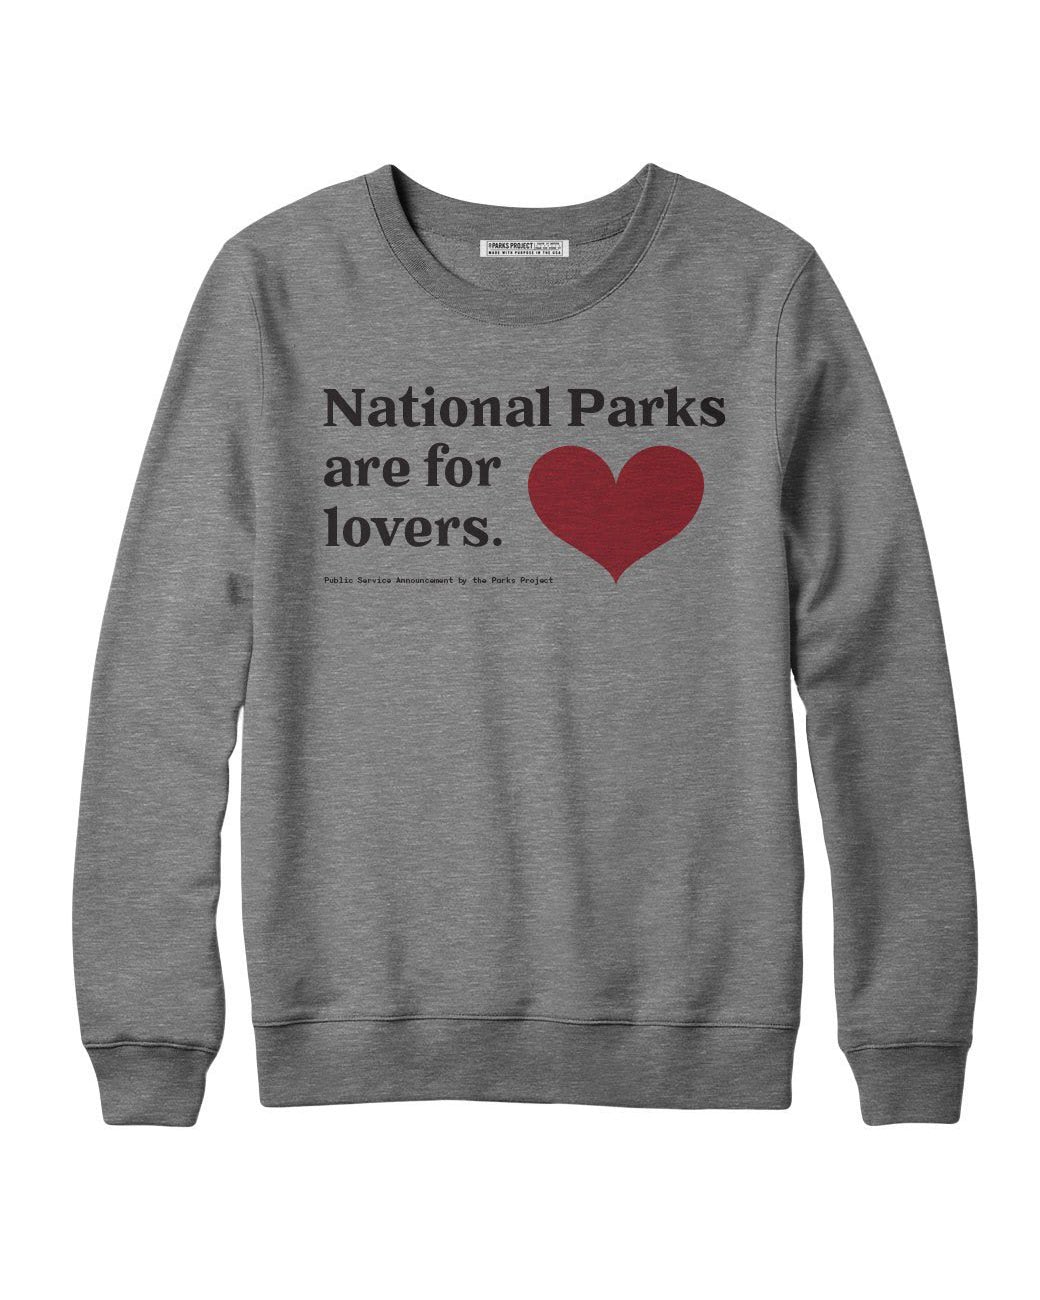 Holiday Gift Guide for National Park Lovers - Couple Gift Idea Sweater